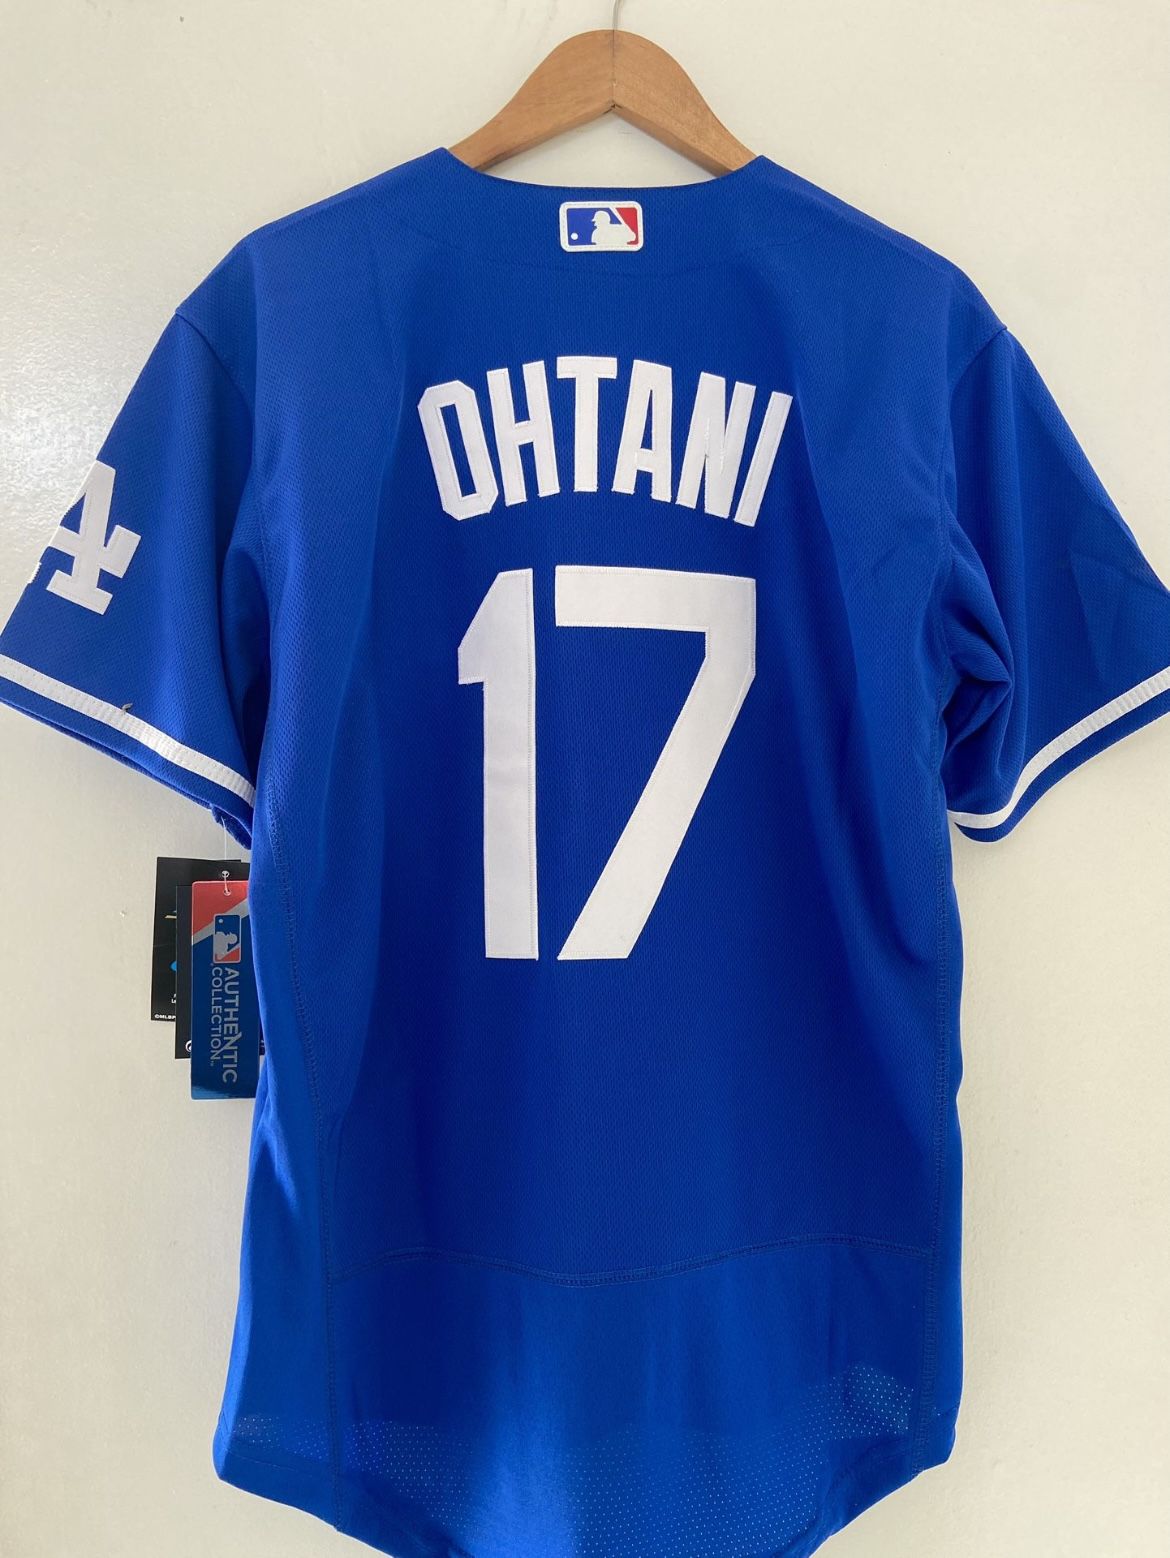 Ohtani Blue Jersey (Men’s & Women’s Cut) Brand New With Tags 